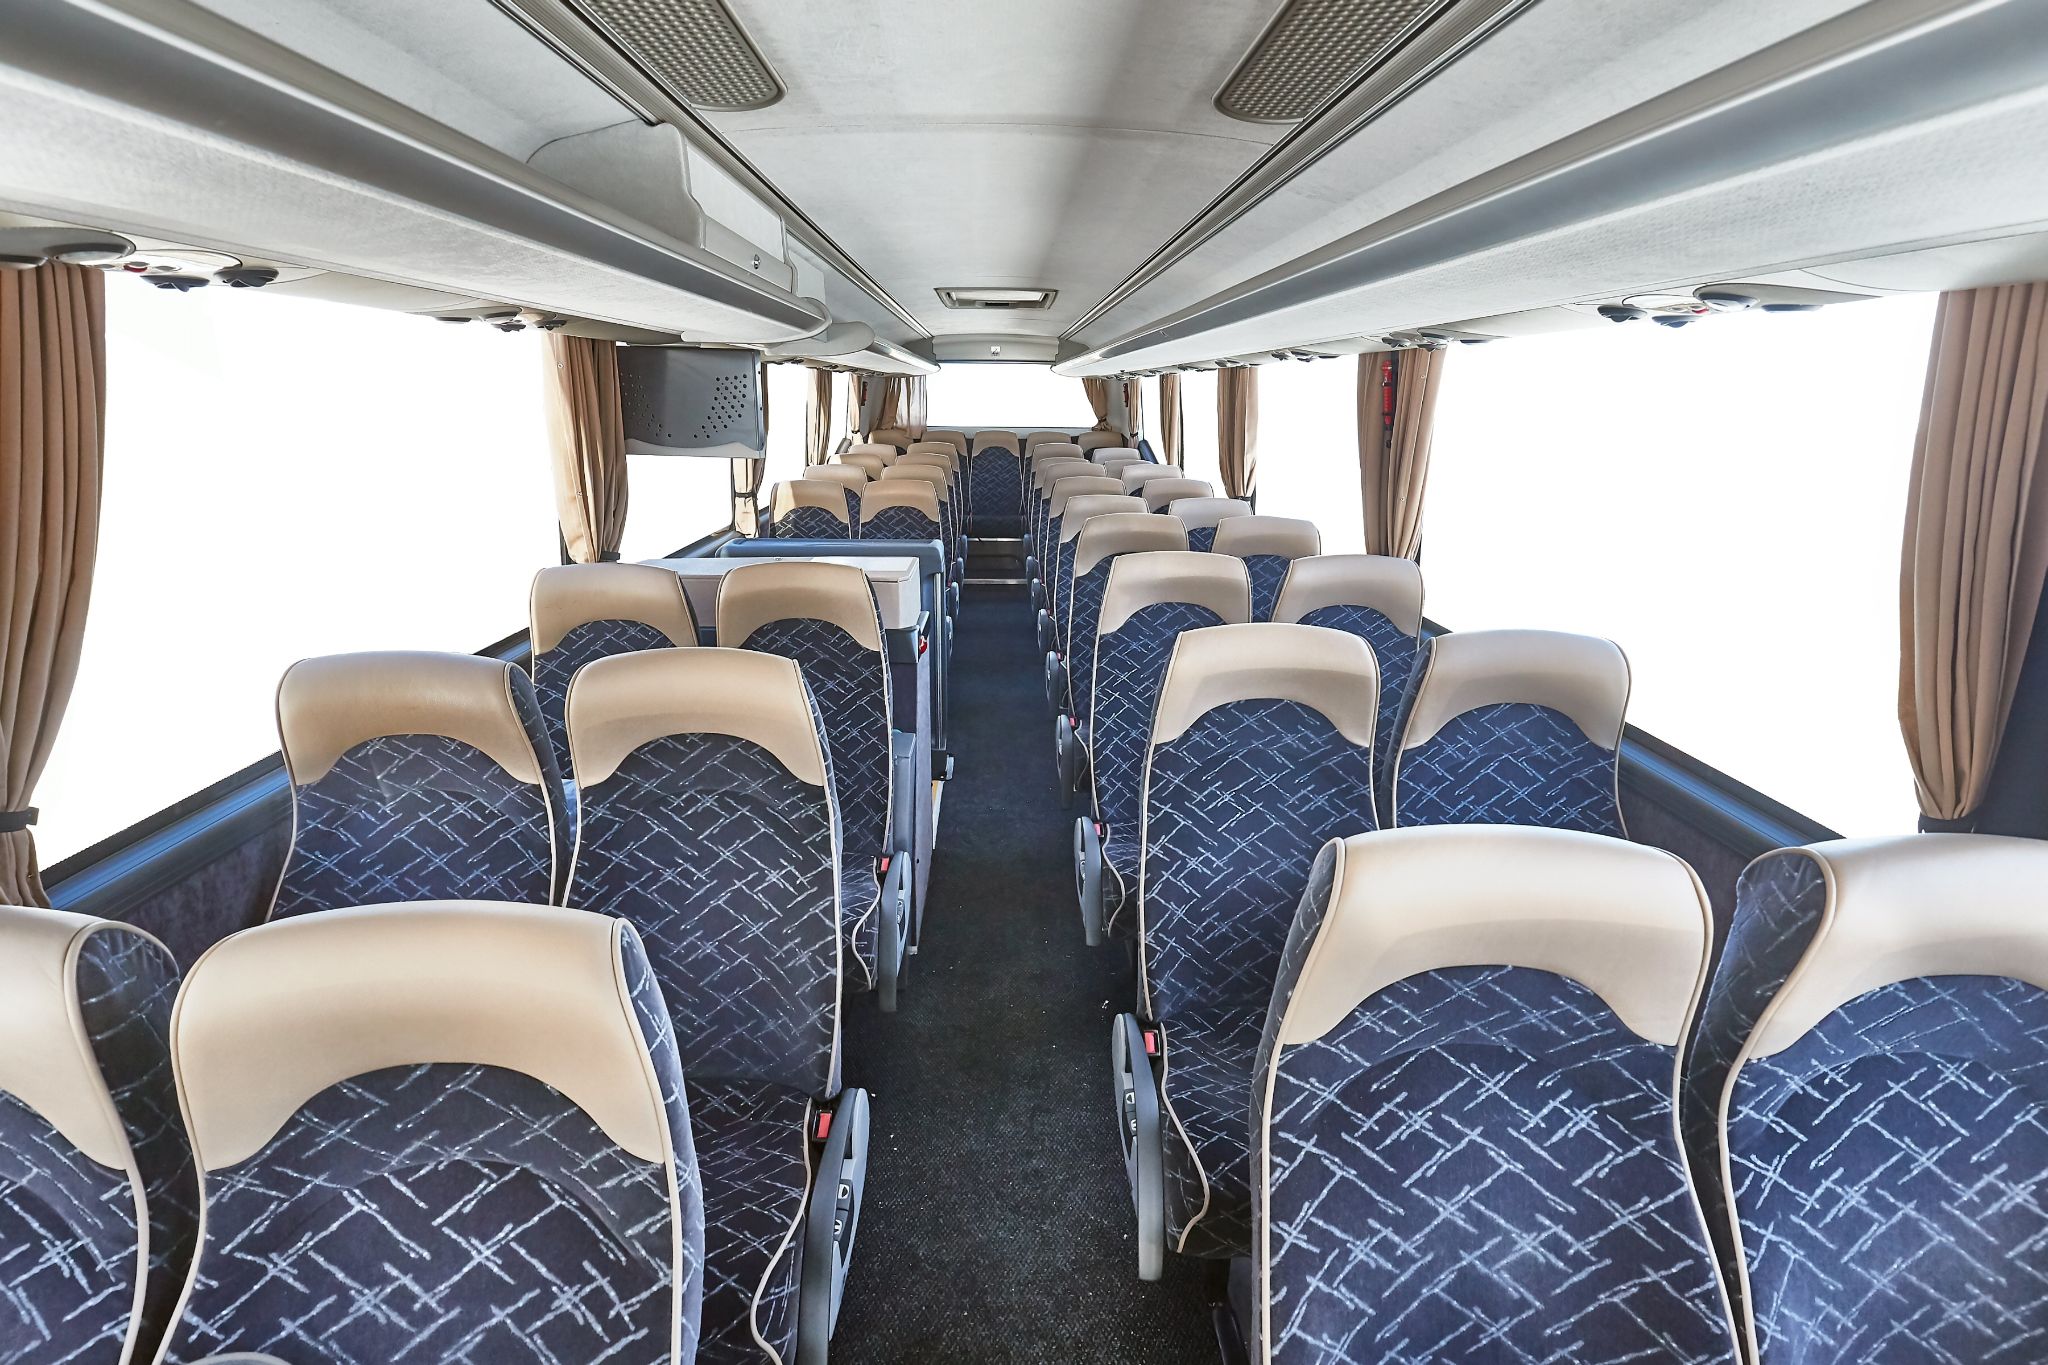 The Guide to Renting a Charter Bus with Price4Limo